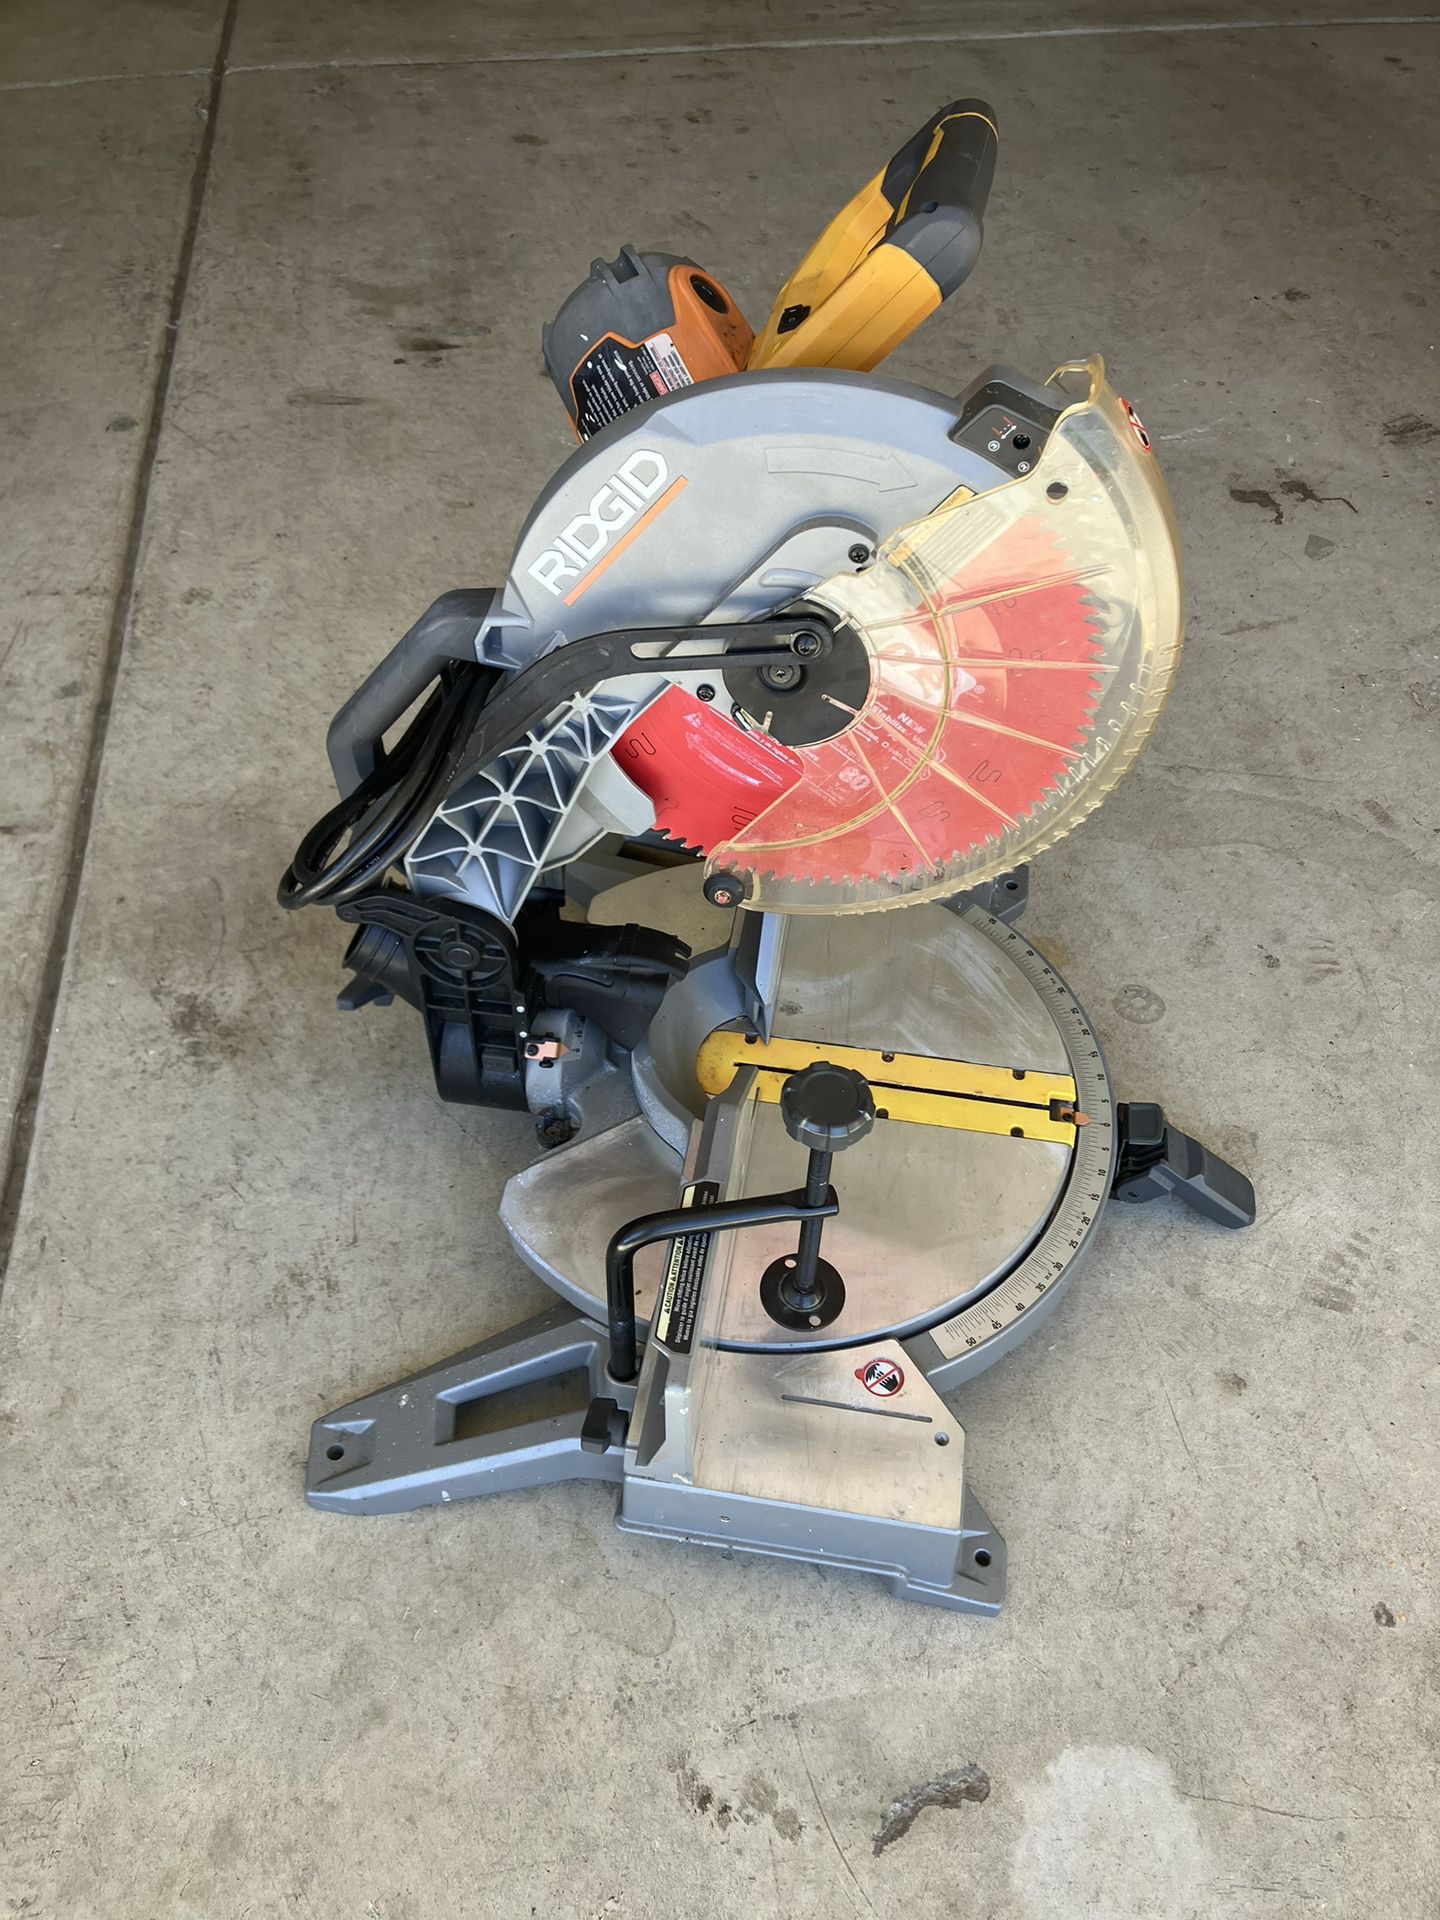 RIDGID 12” Miter Saw 15A Double Bevel Model R41221 good Condition Price is Firm